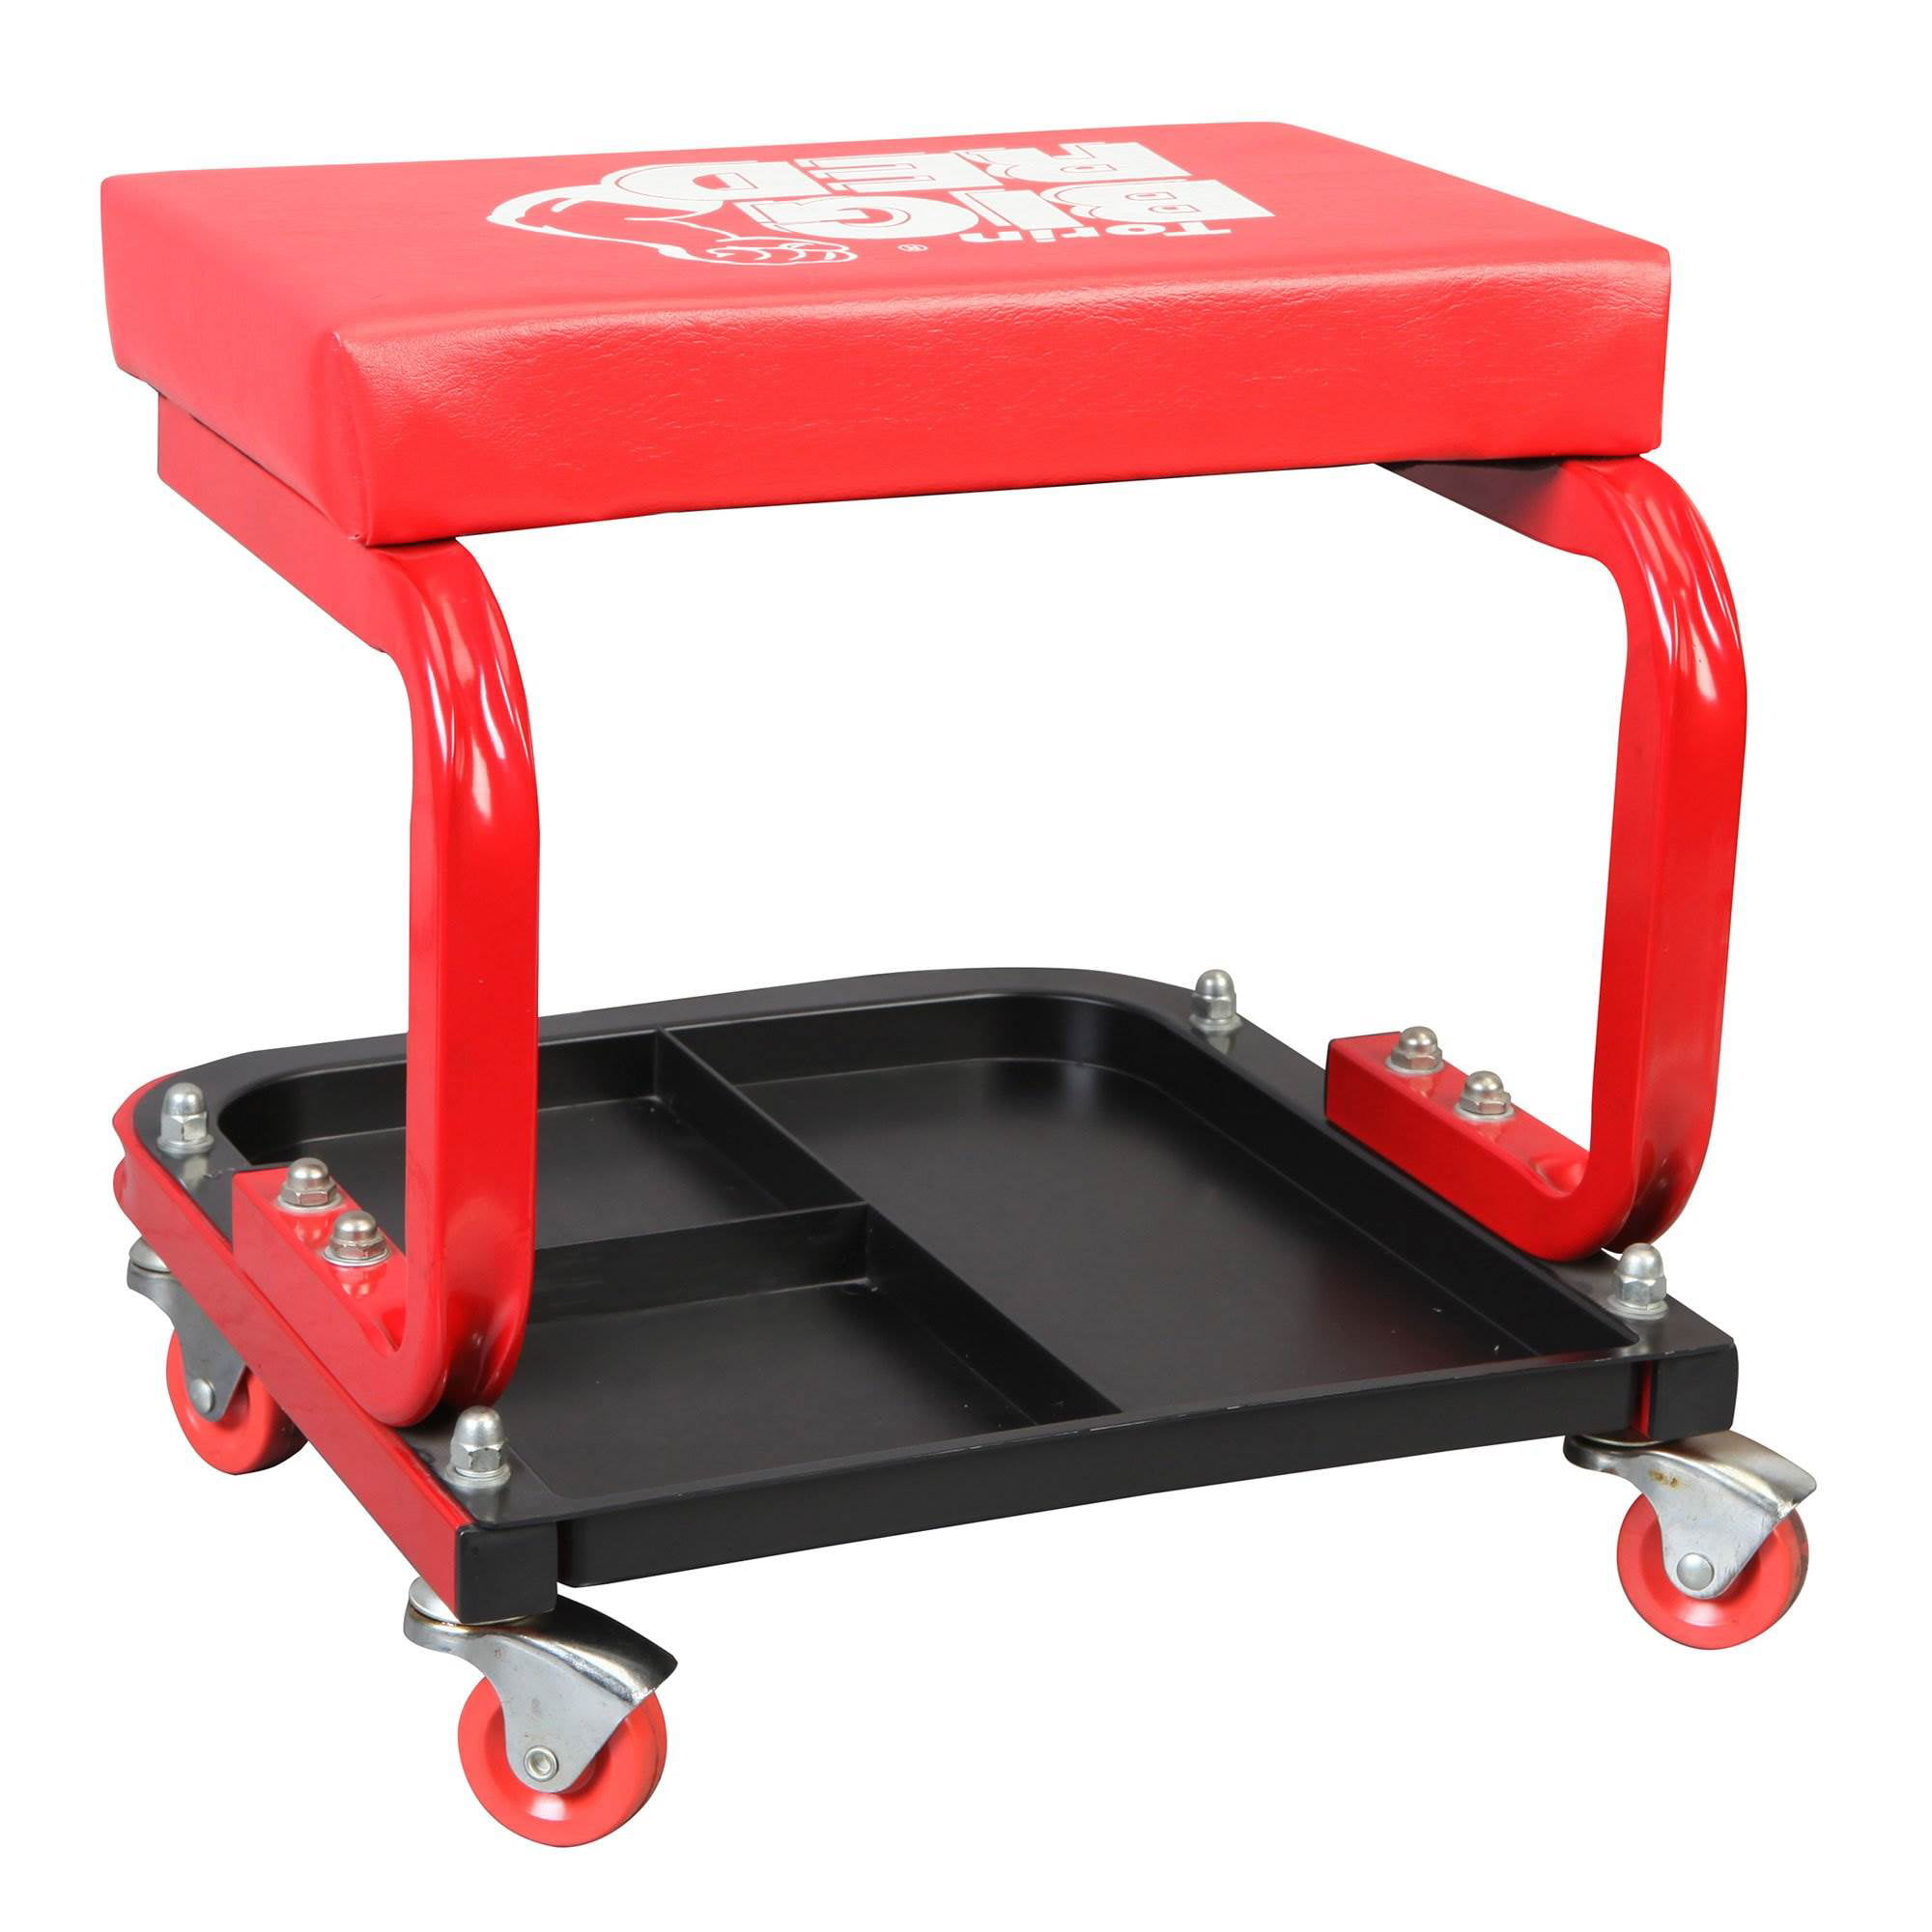 Padded Mechanic Stool with Tool Tray Storage and Cup Holder Black Big Red AR7451B Torin Heavy Duty Rolling Creeper Garage/Shop Seat 